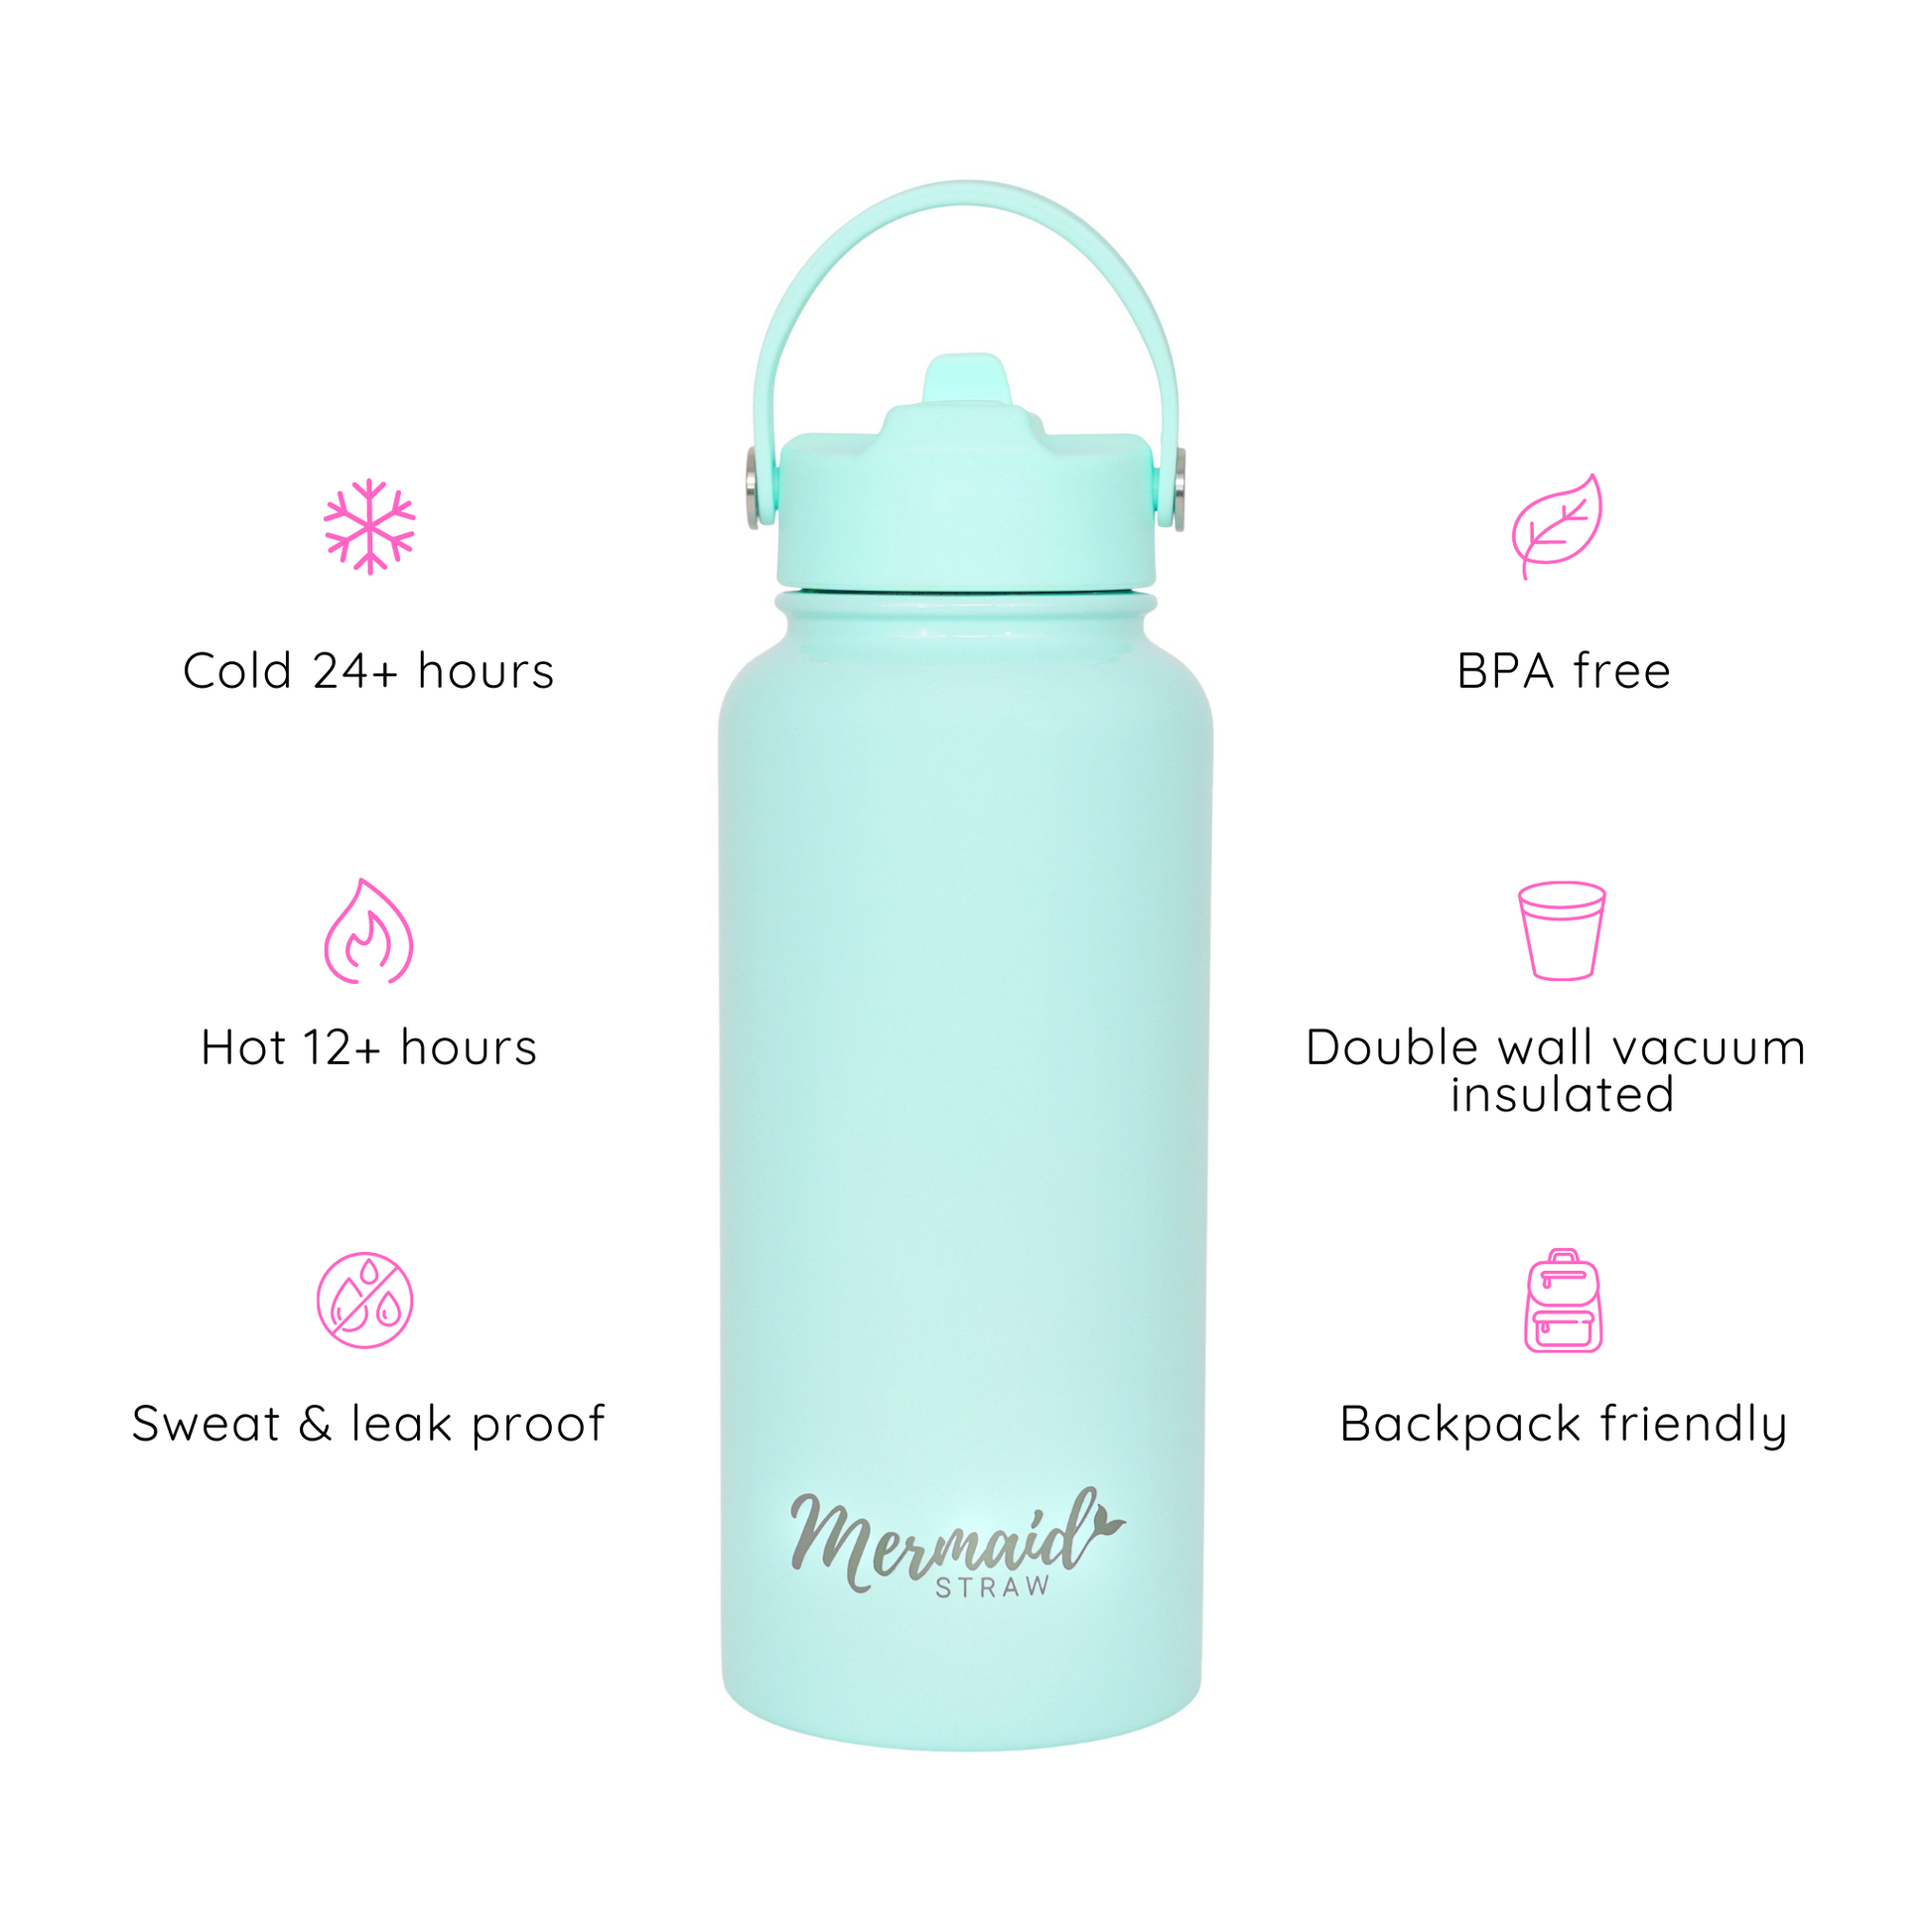 Thermos 32 oz. Foam Insulated Hydration Bottle - Mint